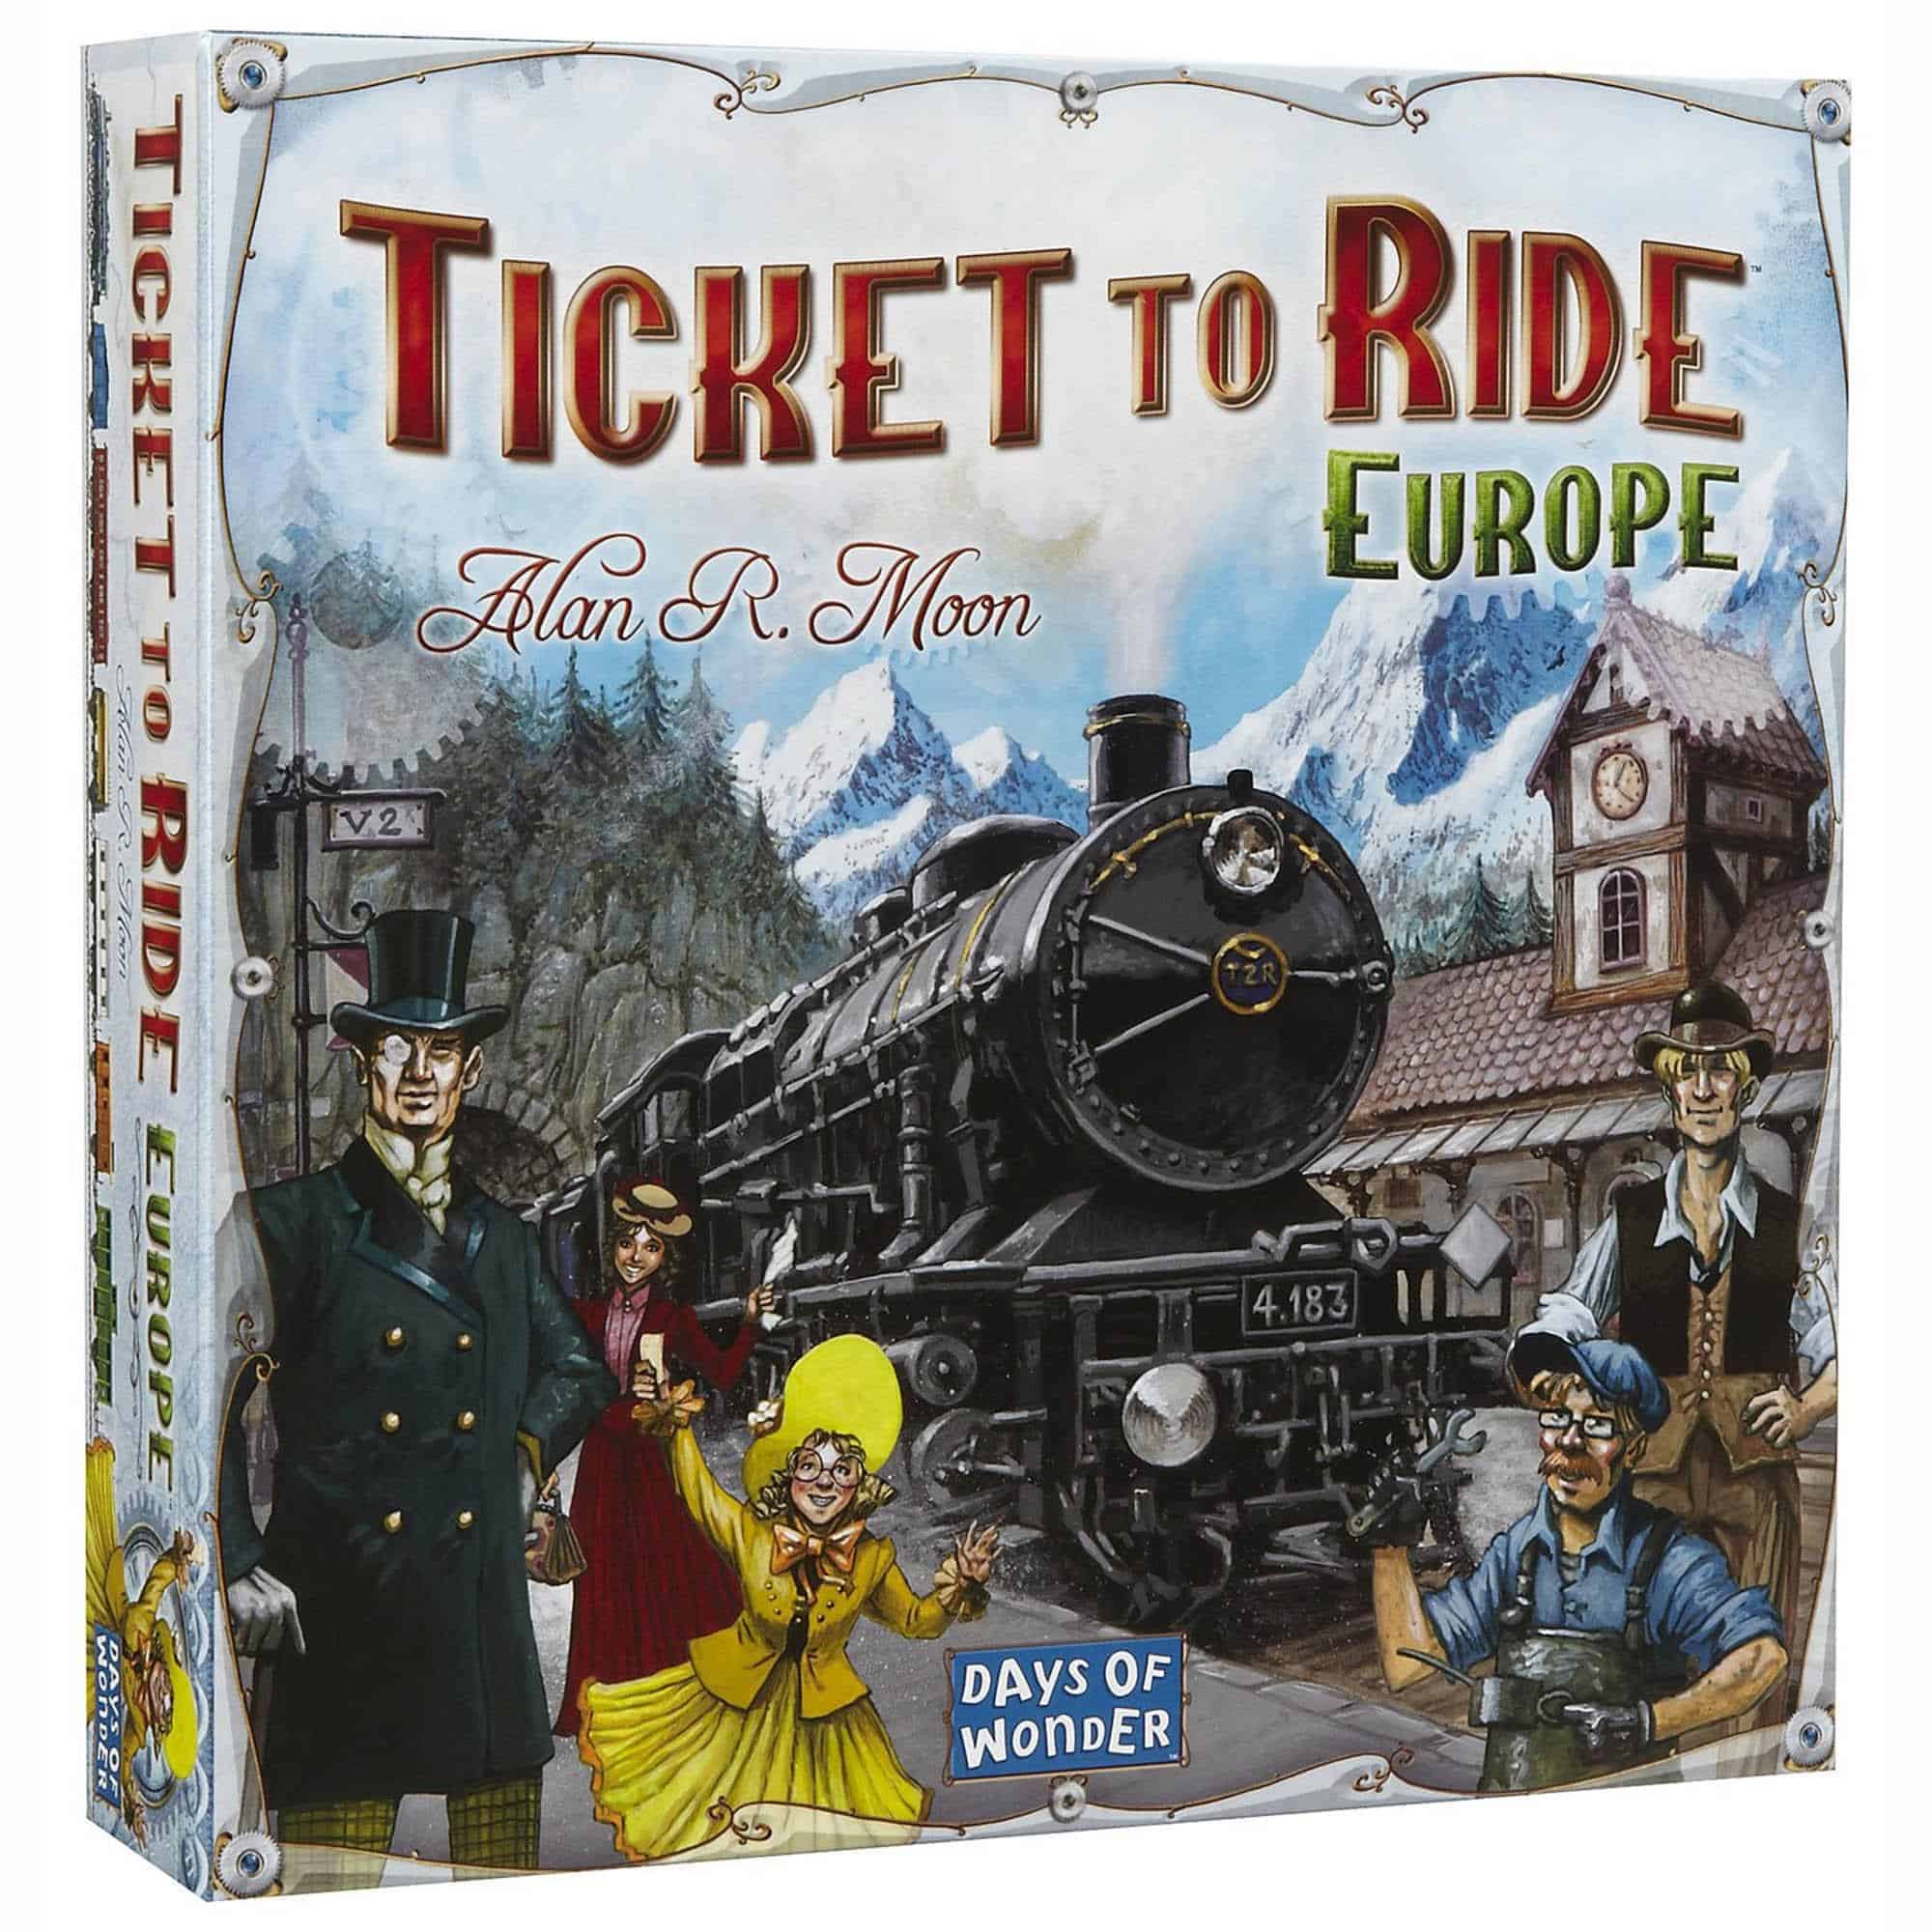 Ticket to Ride is definitely amongst the best choices for any family night as it is impossible to go wrong with.